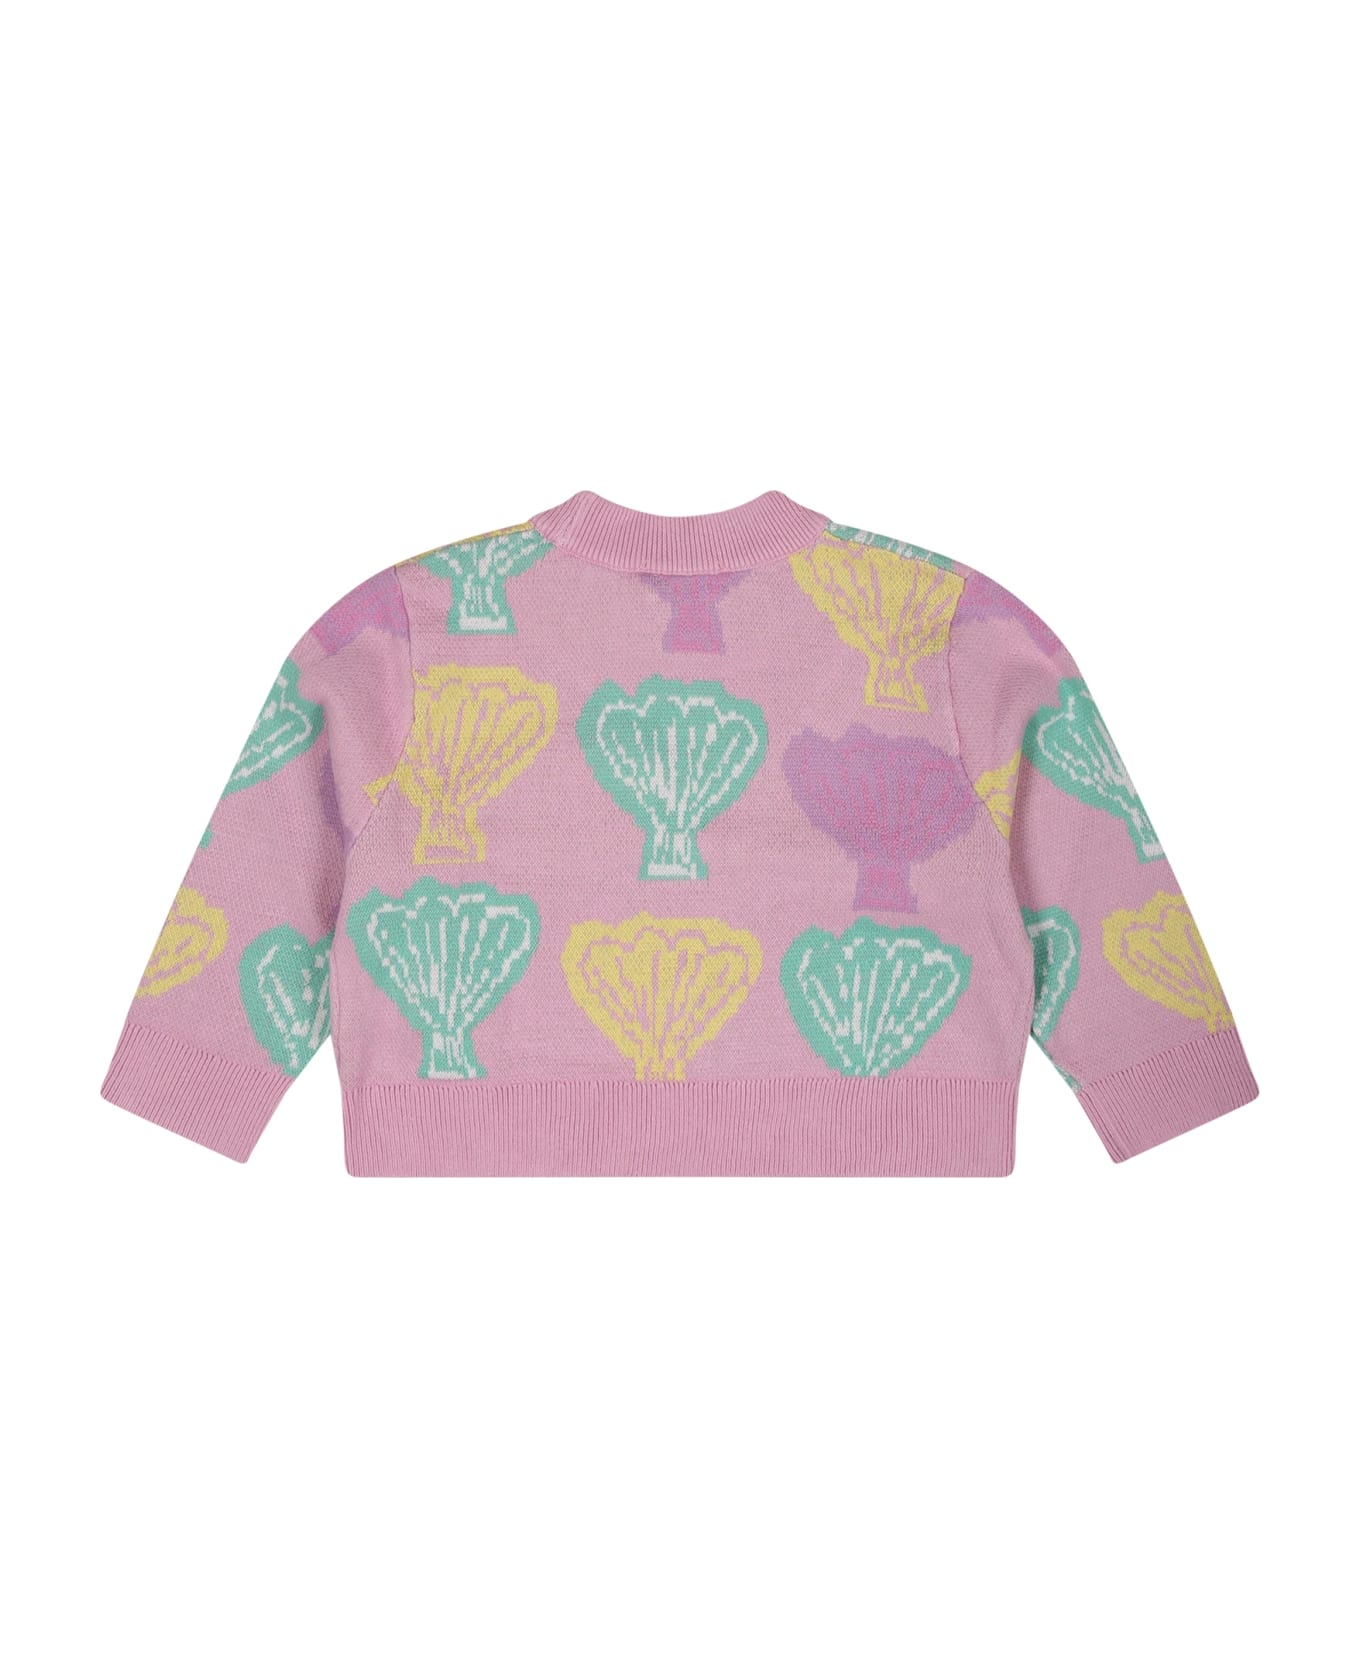 Stella McCartney Kids Pink Sweater For Baby Girl With Shells - Pink